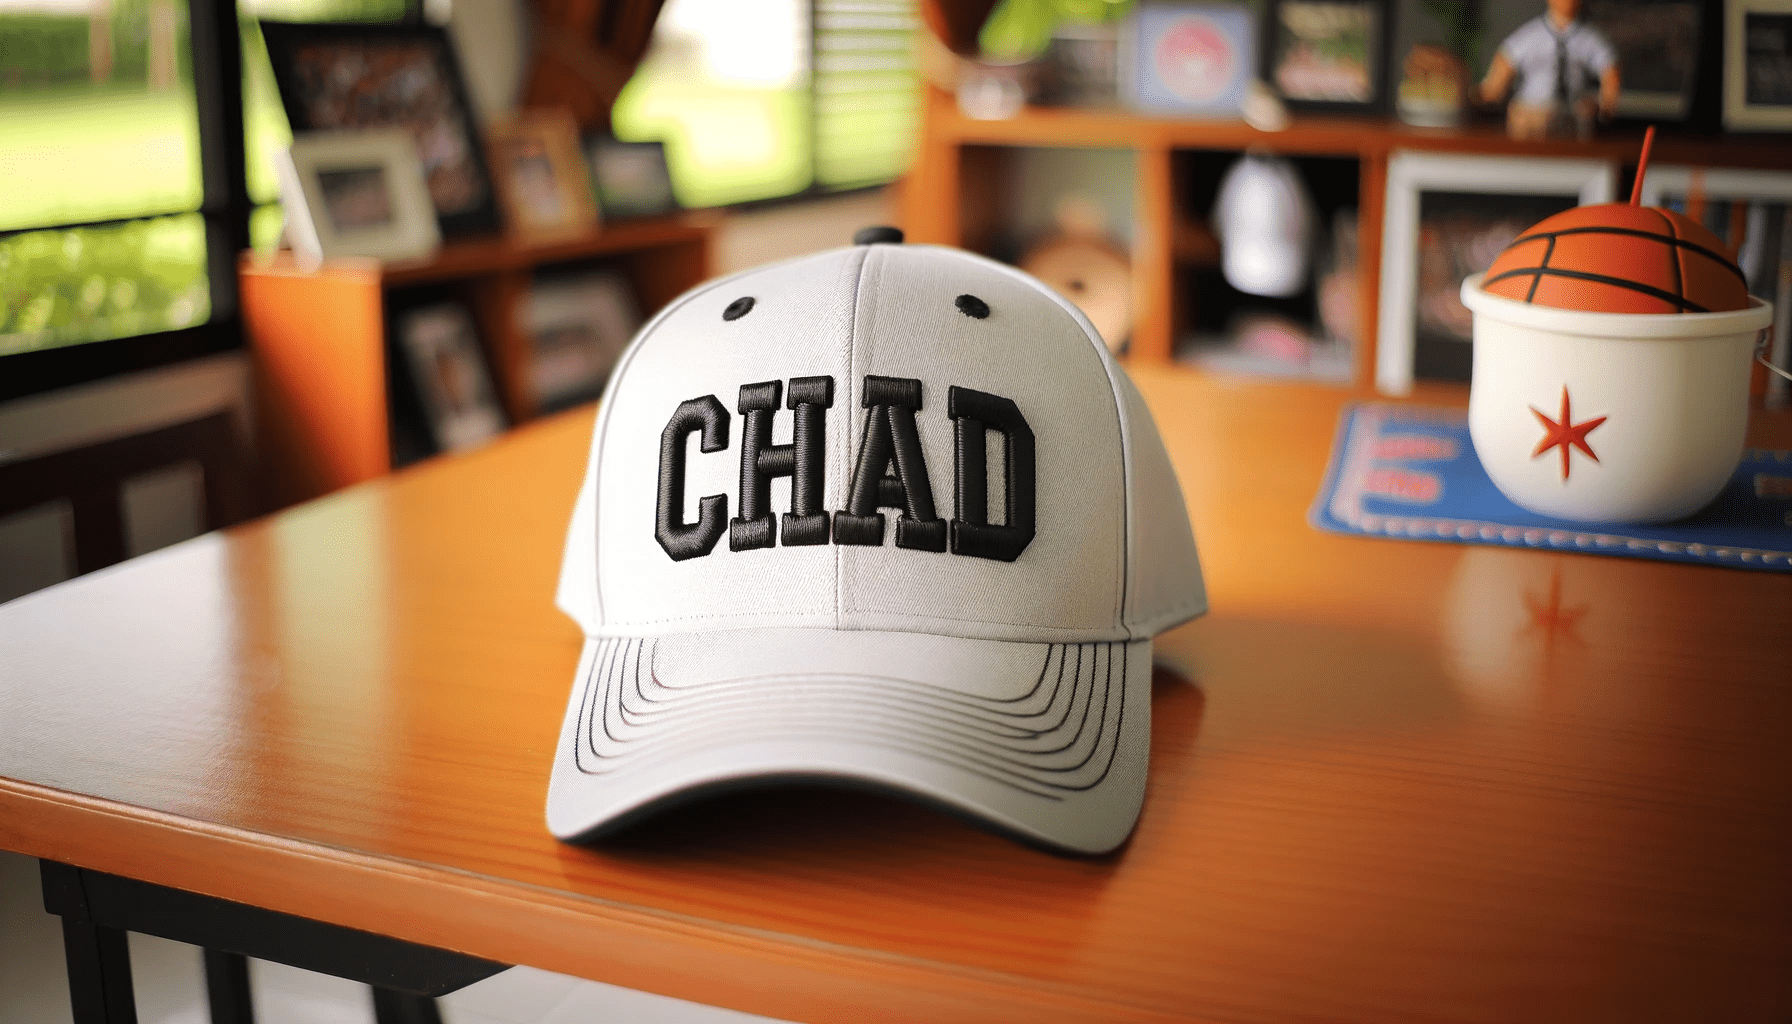 Chad - Four-letter nickname